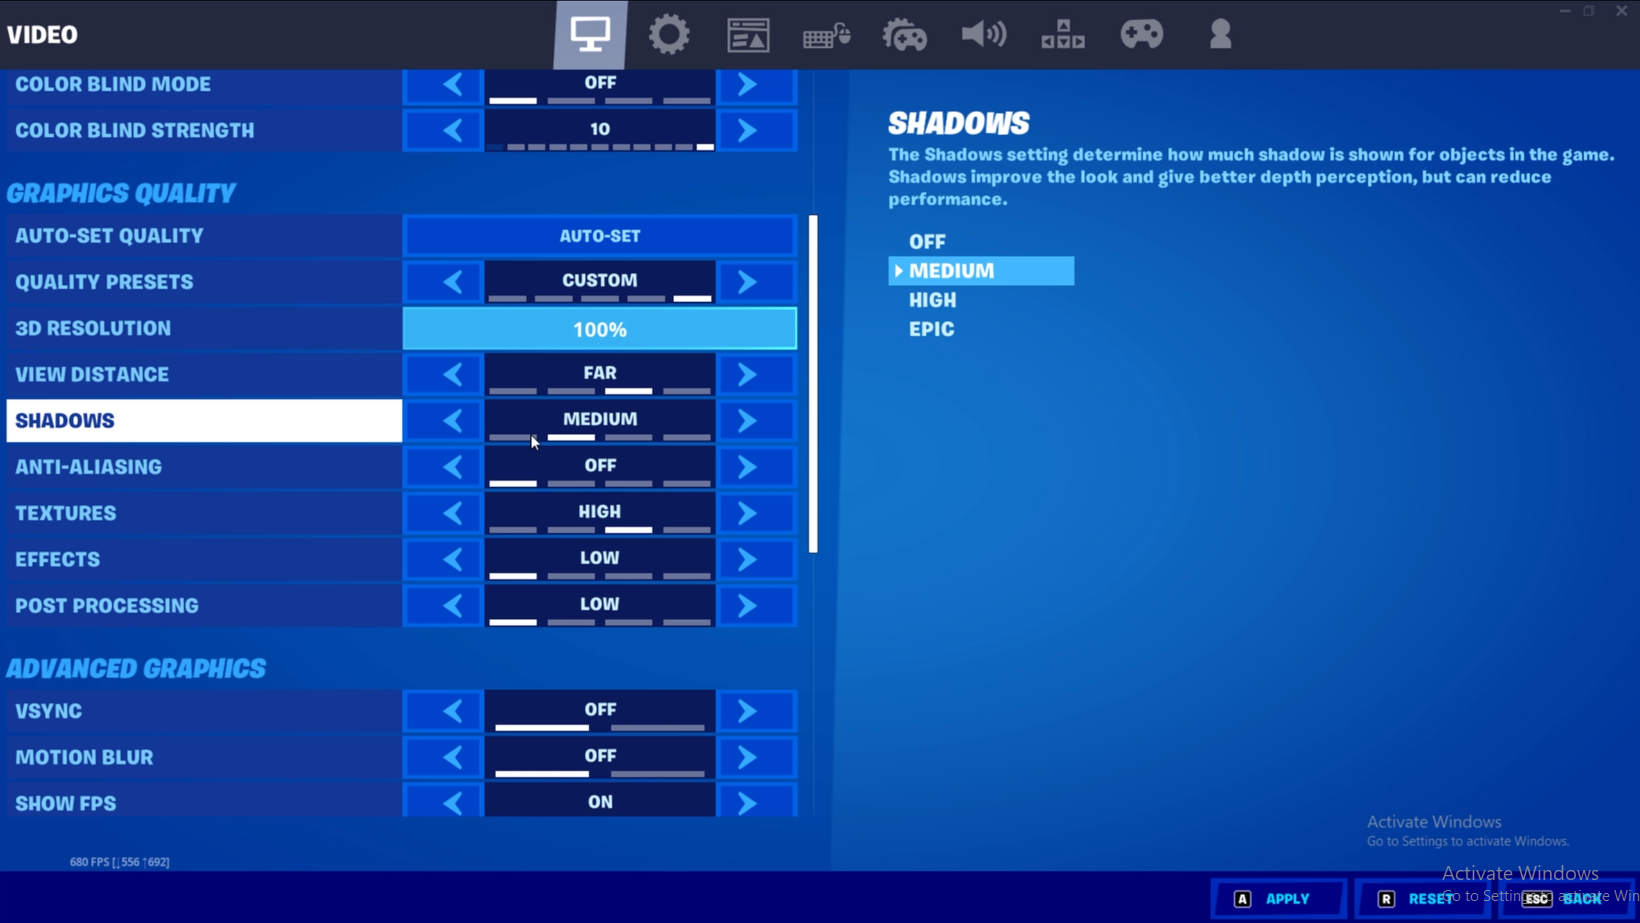 What Graphic Settings For Fortnite Fortnite Season 7 Settings For High Fps And Low Input Lag Nvidia Amd The Vr Soldier